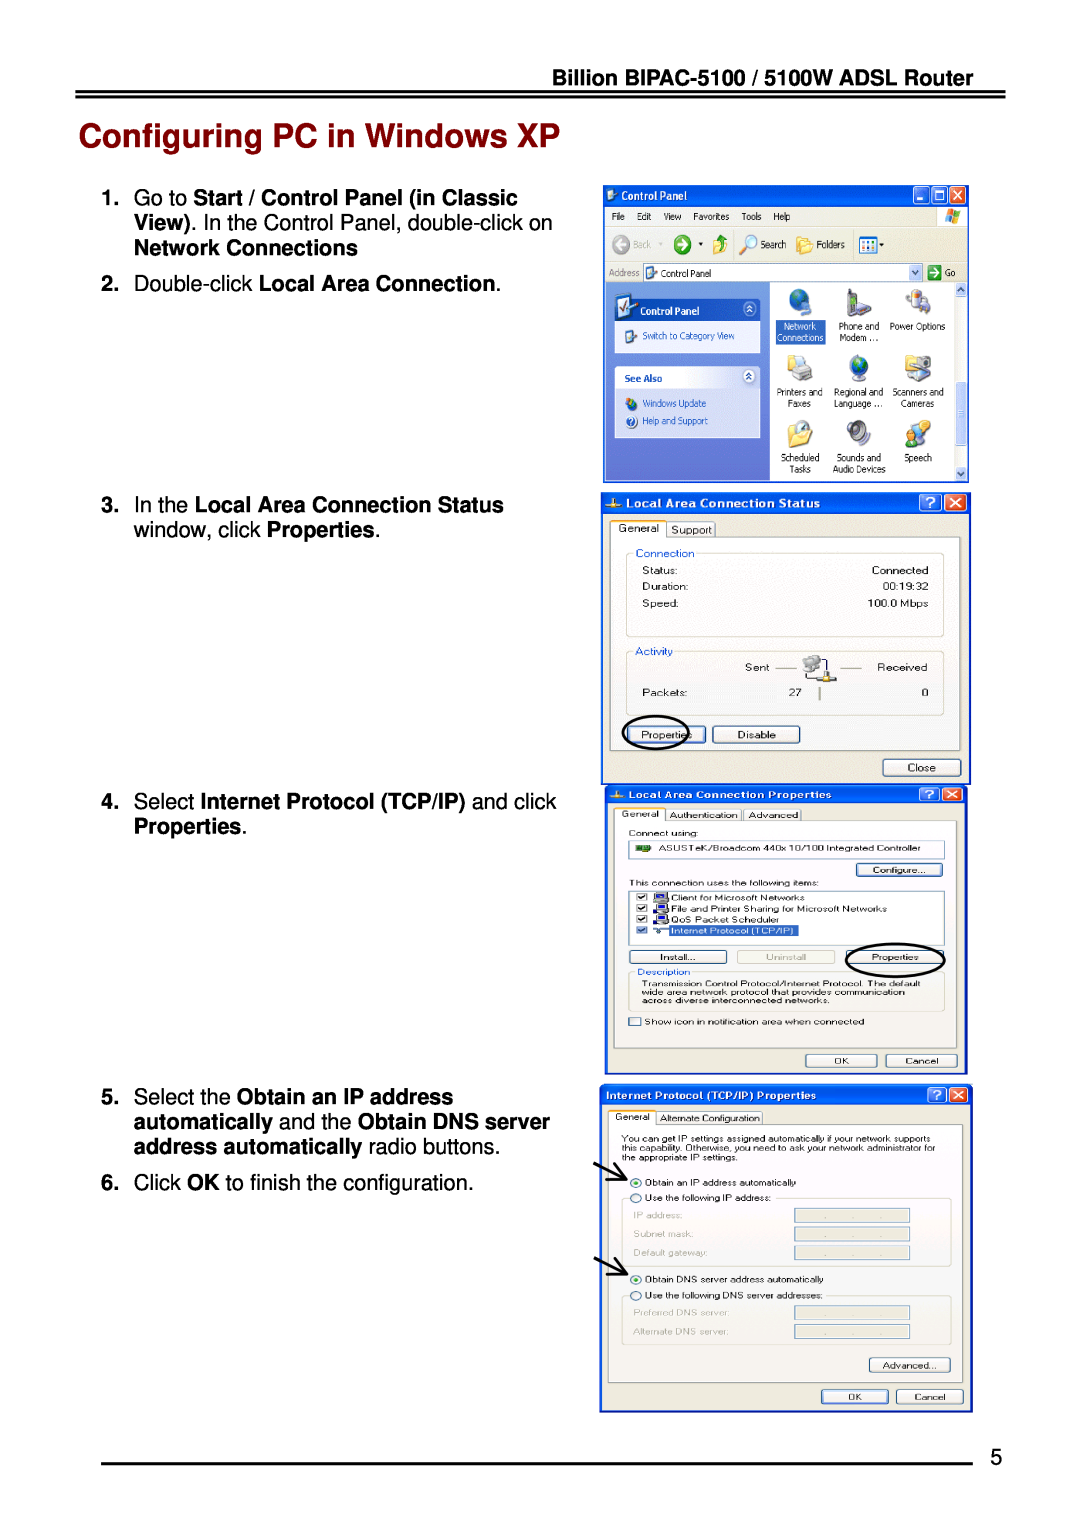 Billion Electric Company 5100W Configuring PC in Windows XP, In the Local Area Connection Status window, click Properties 